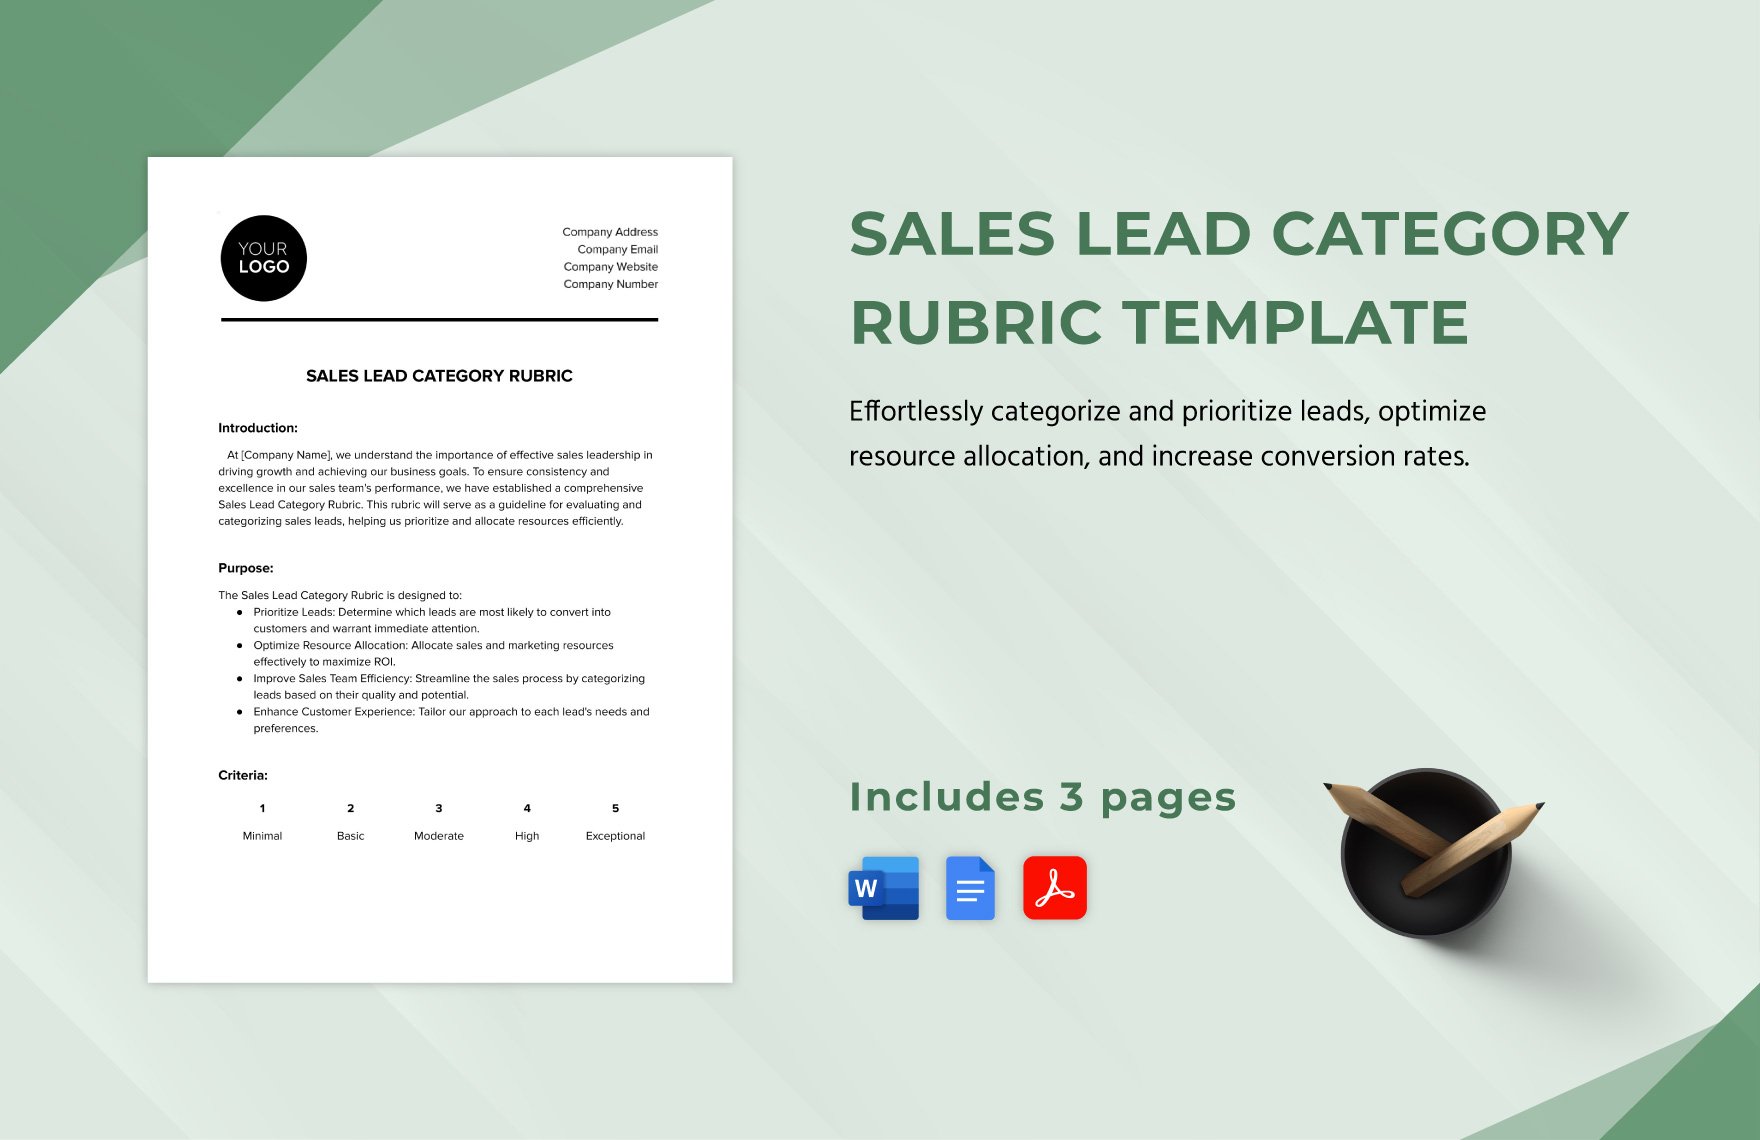 Sales Lead Category Rubric Template in Word, Google Docs, PDF